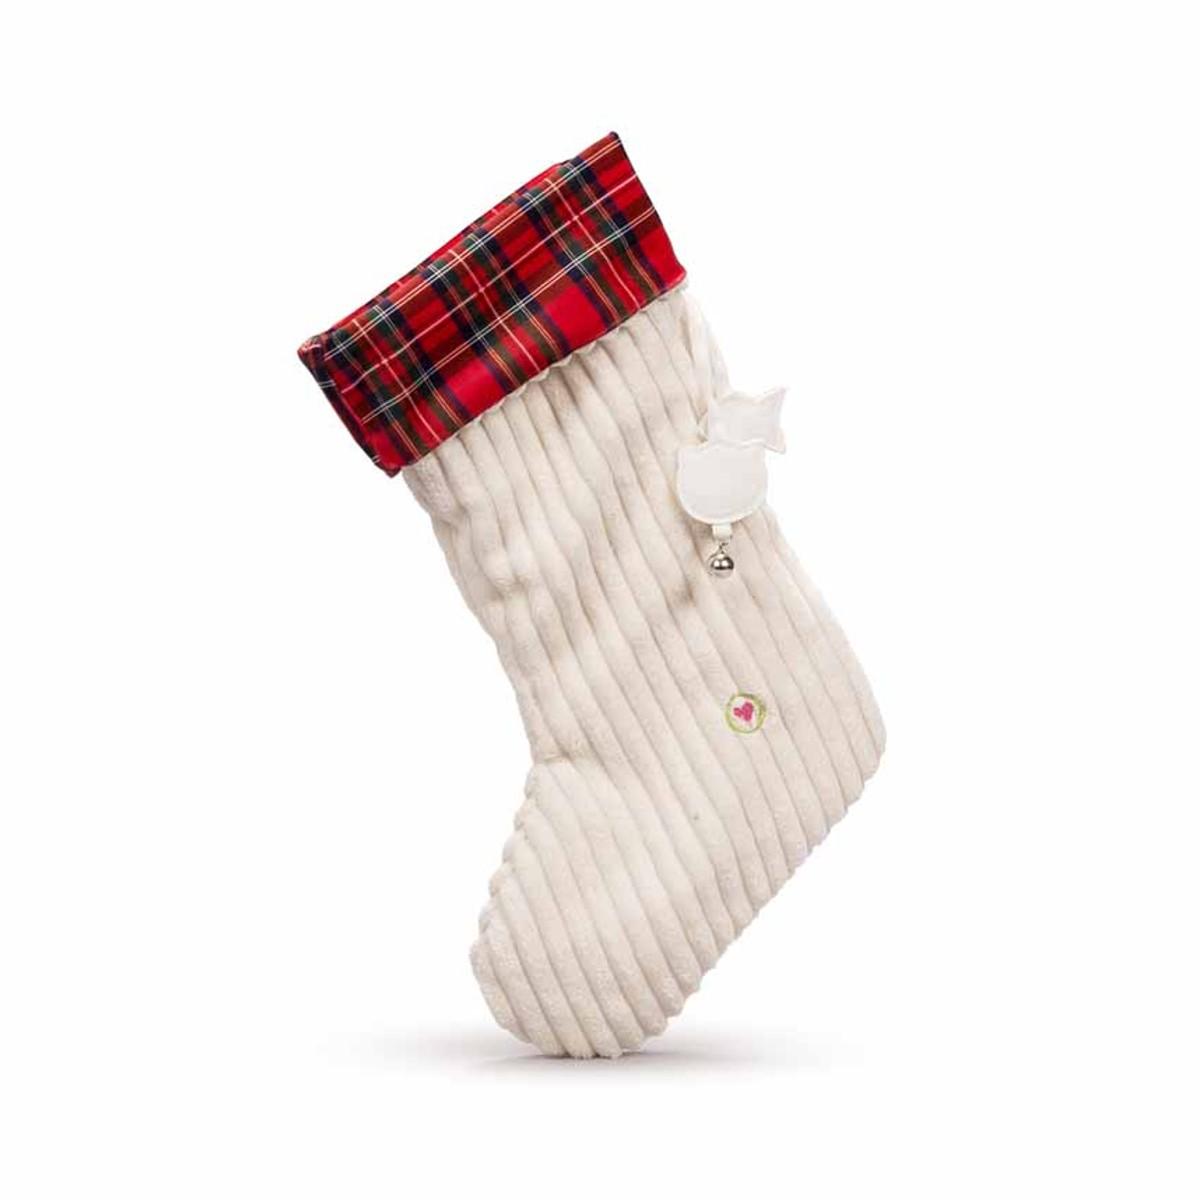 HuggleHounds Holiday Cat Stocking - Off White Corduroy with Tartan Cuff